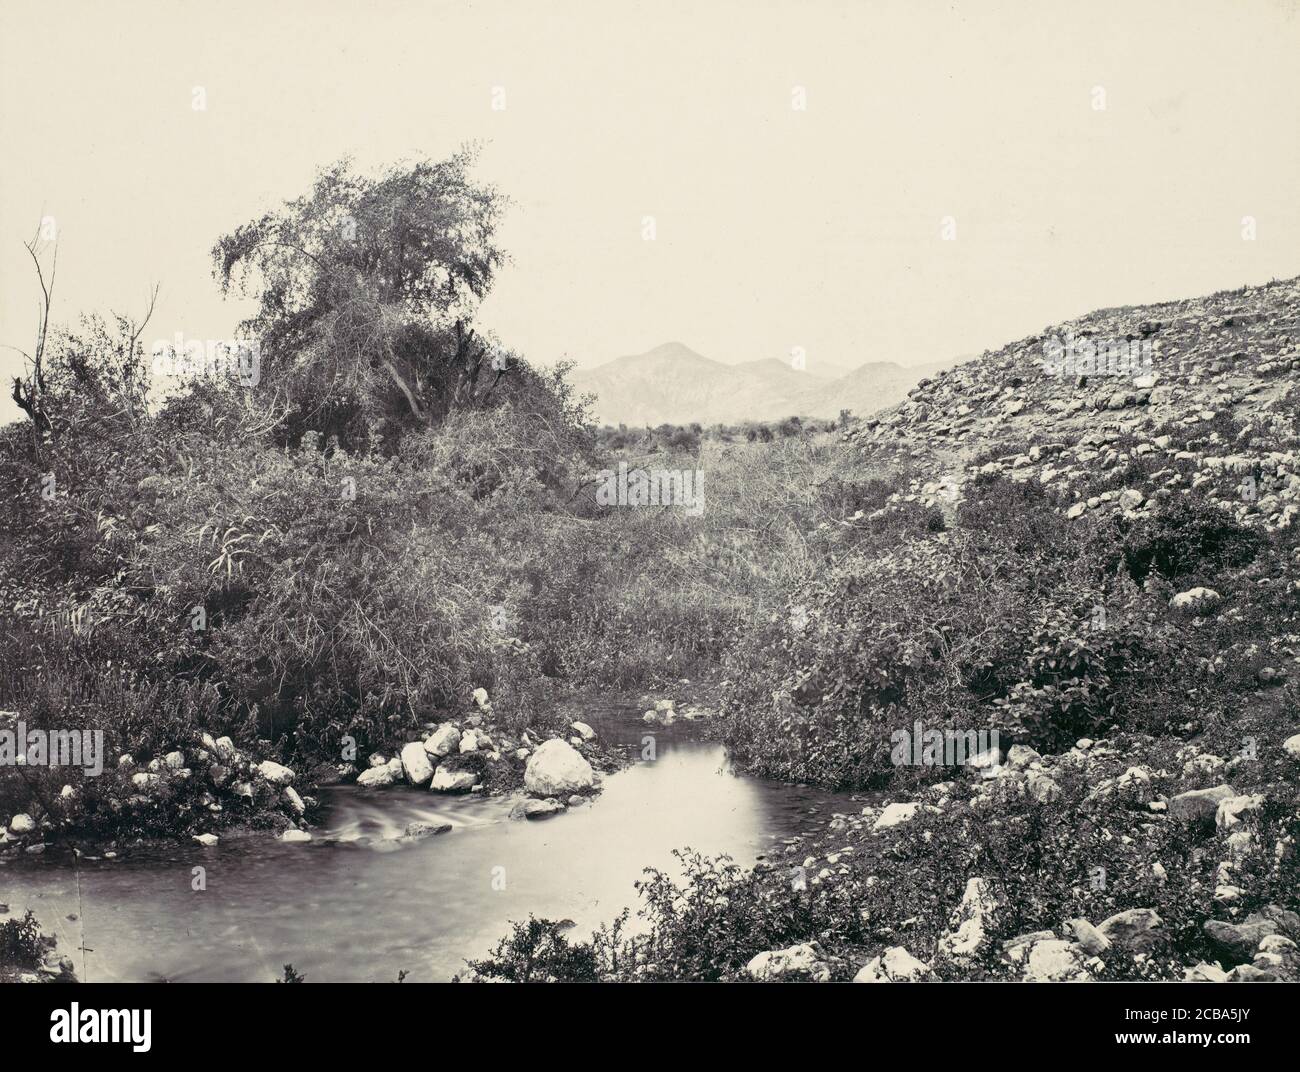 The Fountain of Jerico and Probable Site of the City, ca. 1857. Stock Photo